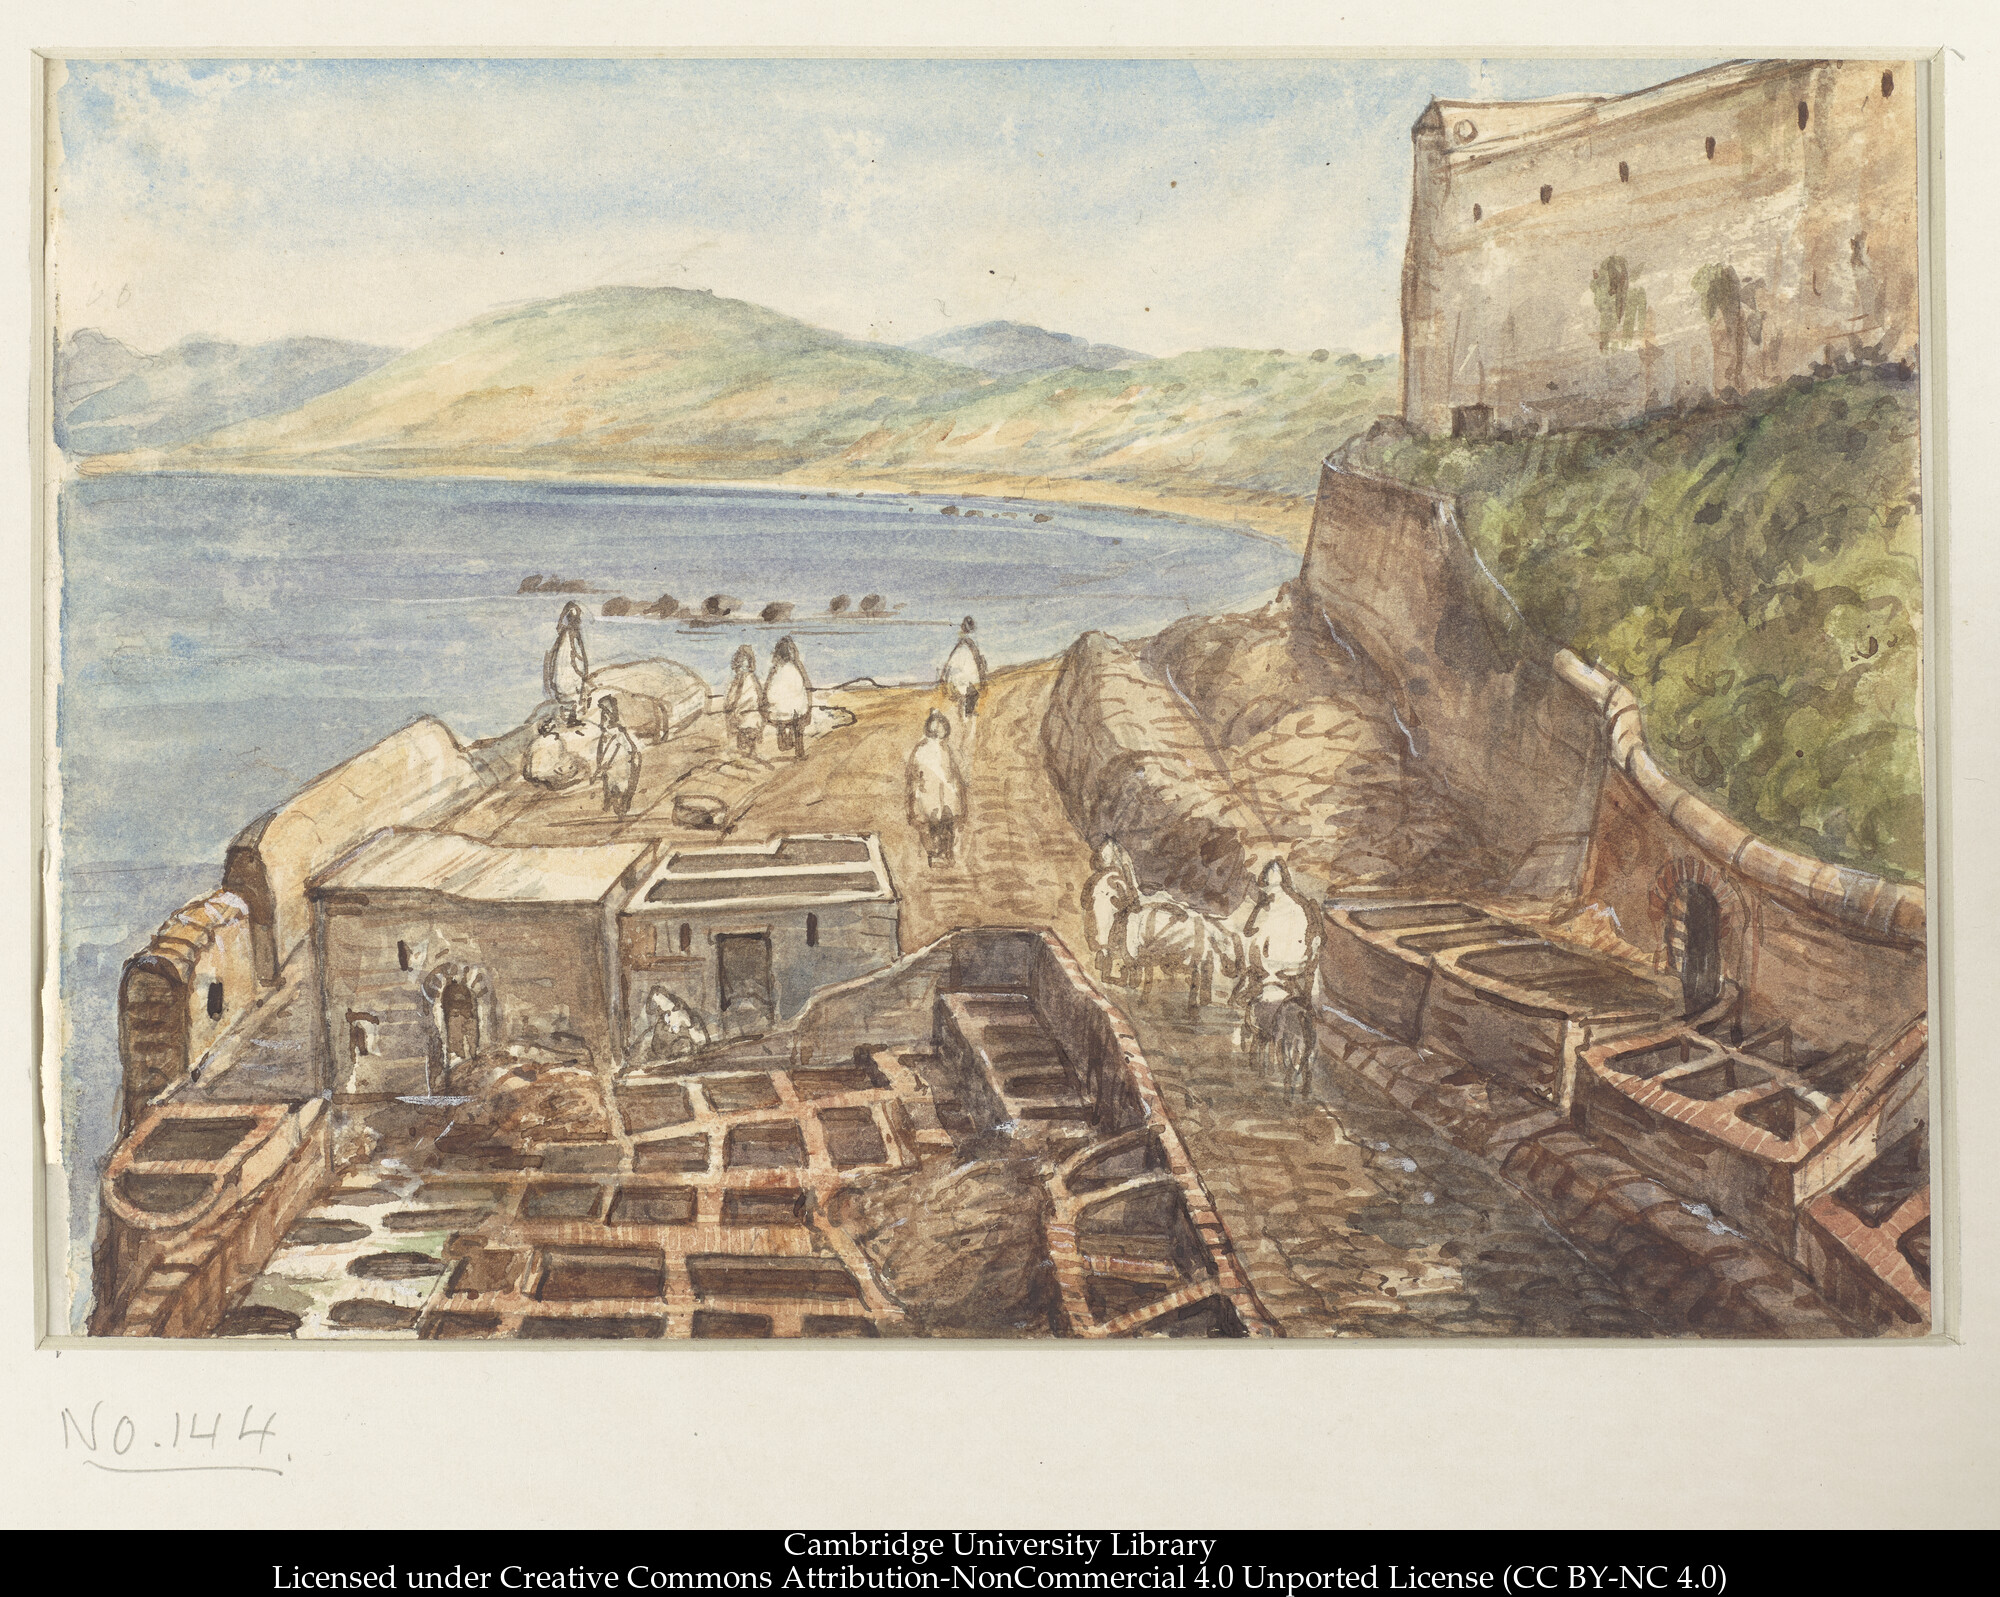 Moorish tannery from the window of the Victoria Hotel, Tangier, 1865-66